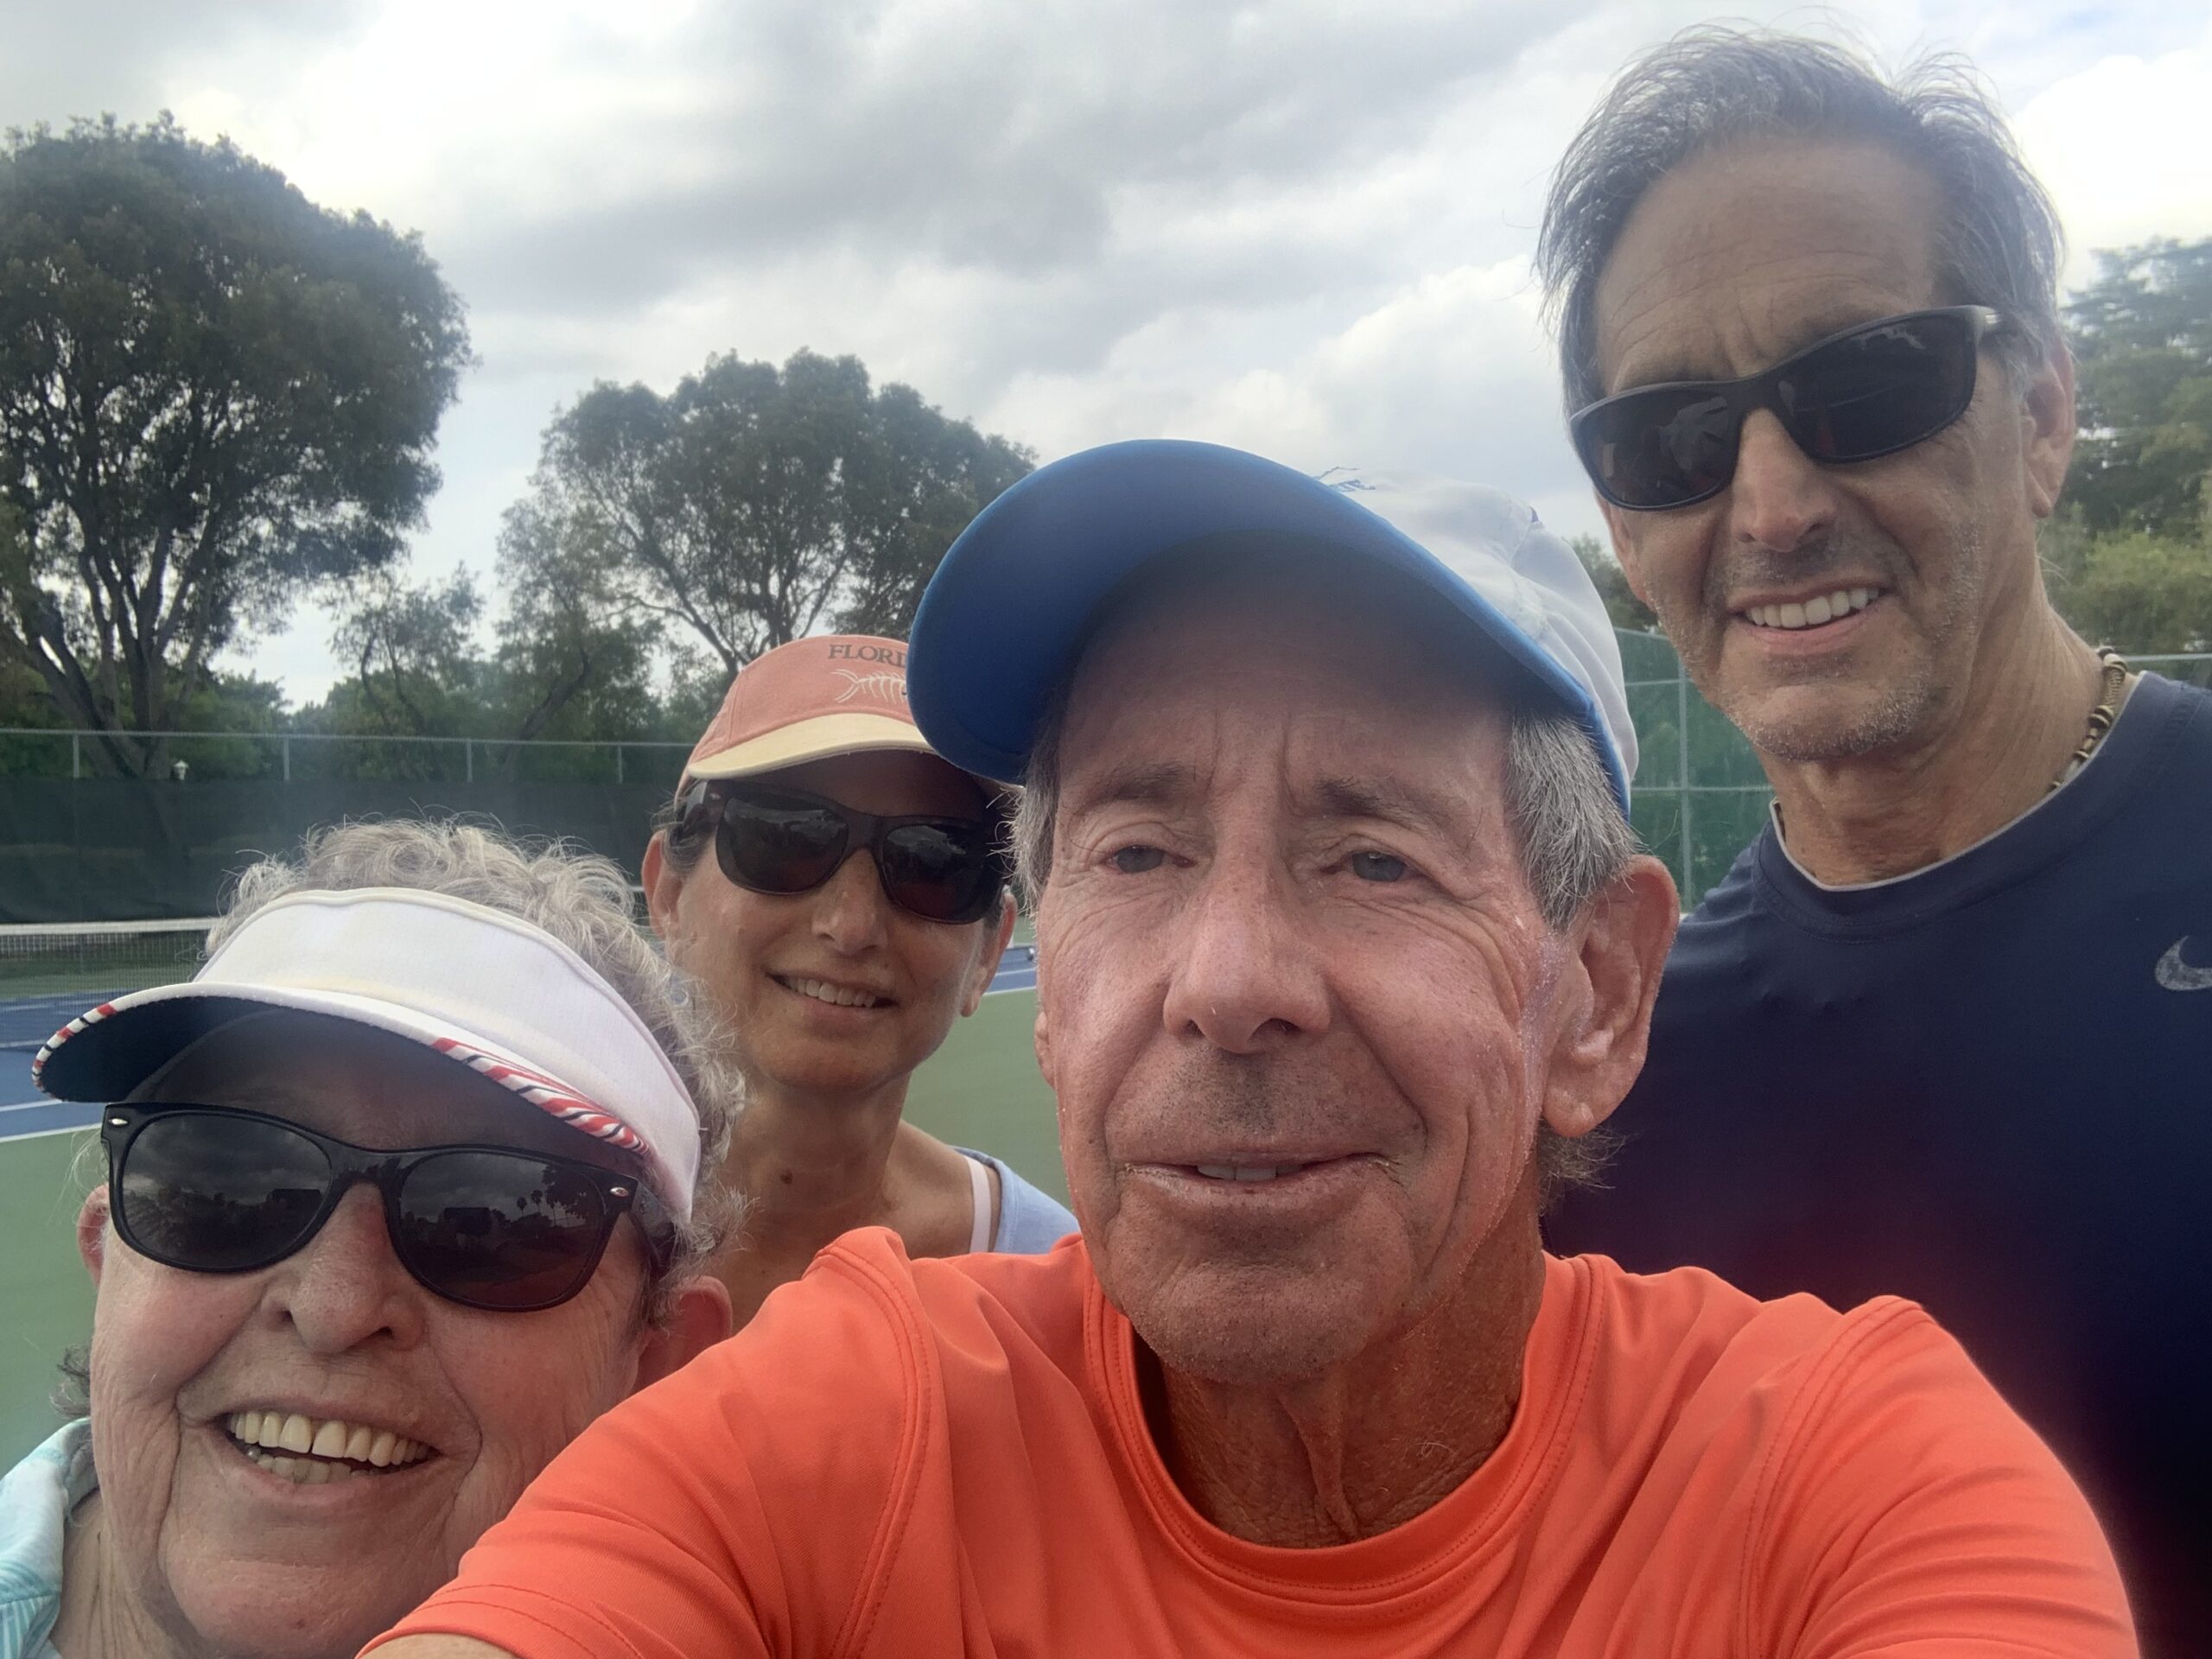 Bob-with-Geoff-Marjorie-and-Kathy-after-an-Advanced-Beginners-Clinic-in-Delray-Beach-FL